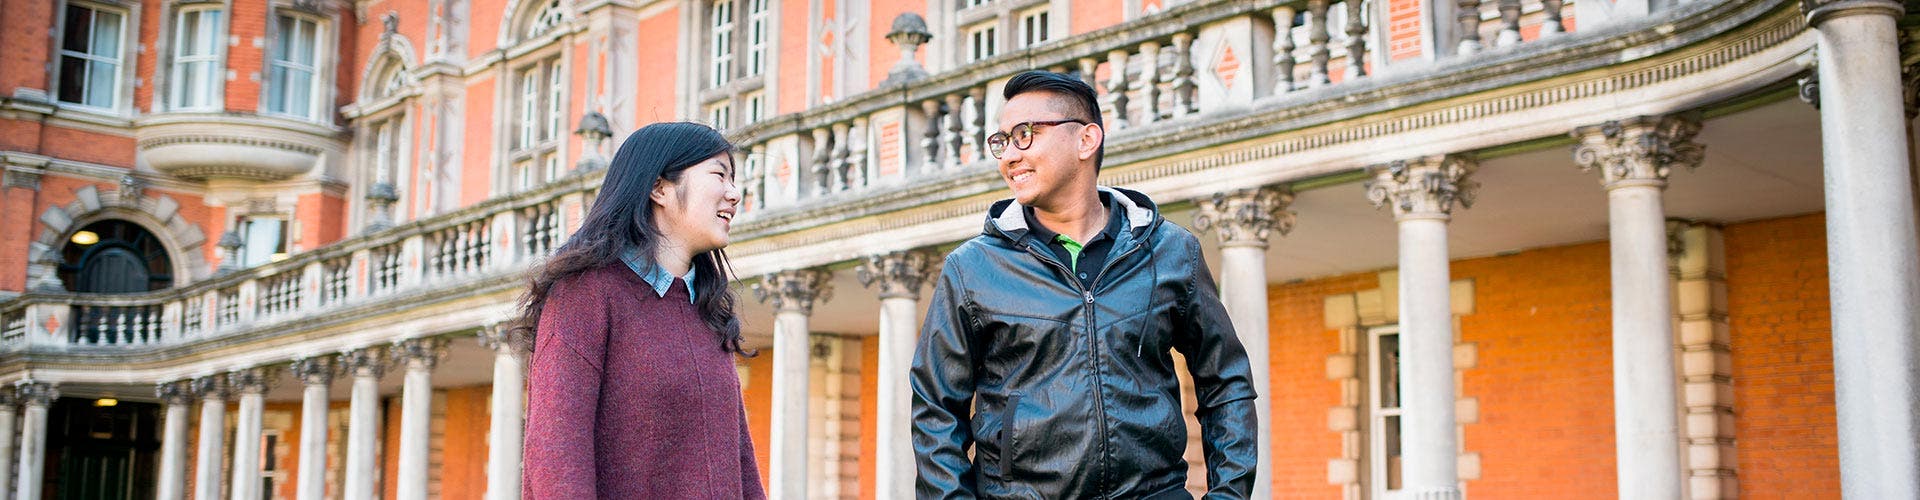 Two students walking on Royal Holloway's campus